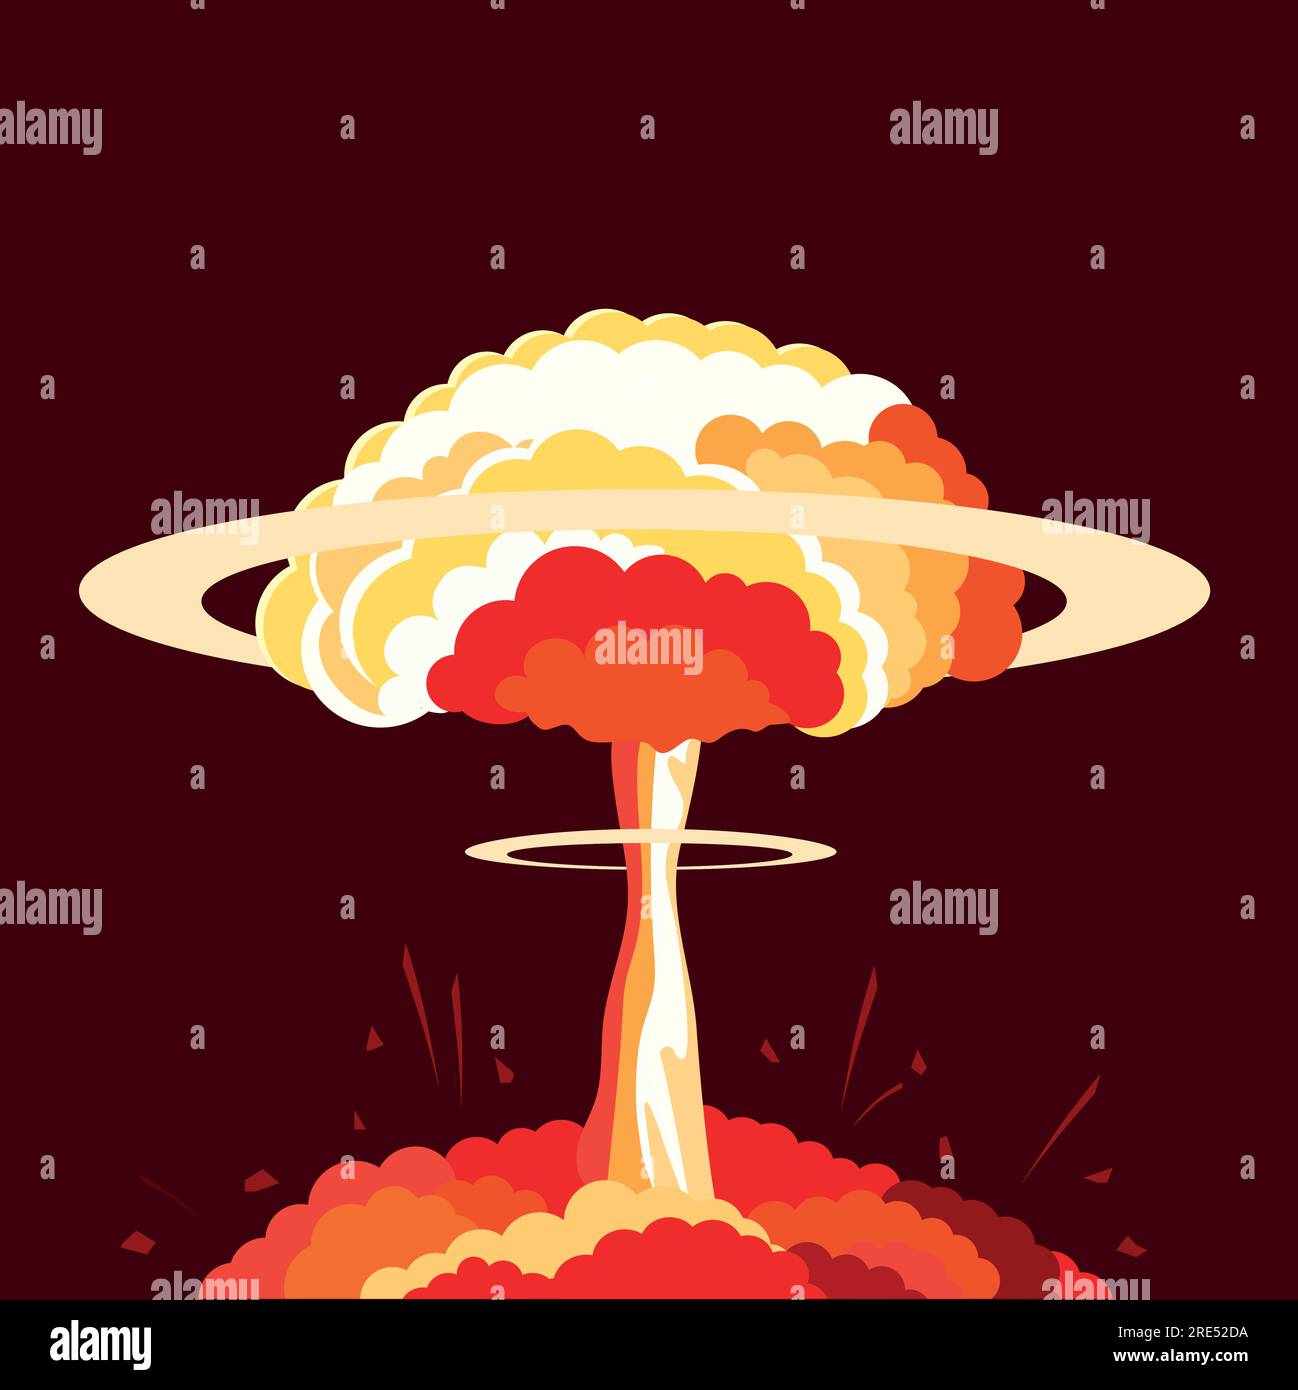 NUKE red button on a grunge concrete background. Nuclear bomb launching  button, vector illustration Stock Vector Image & Art - Alamy